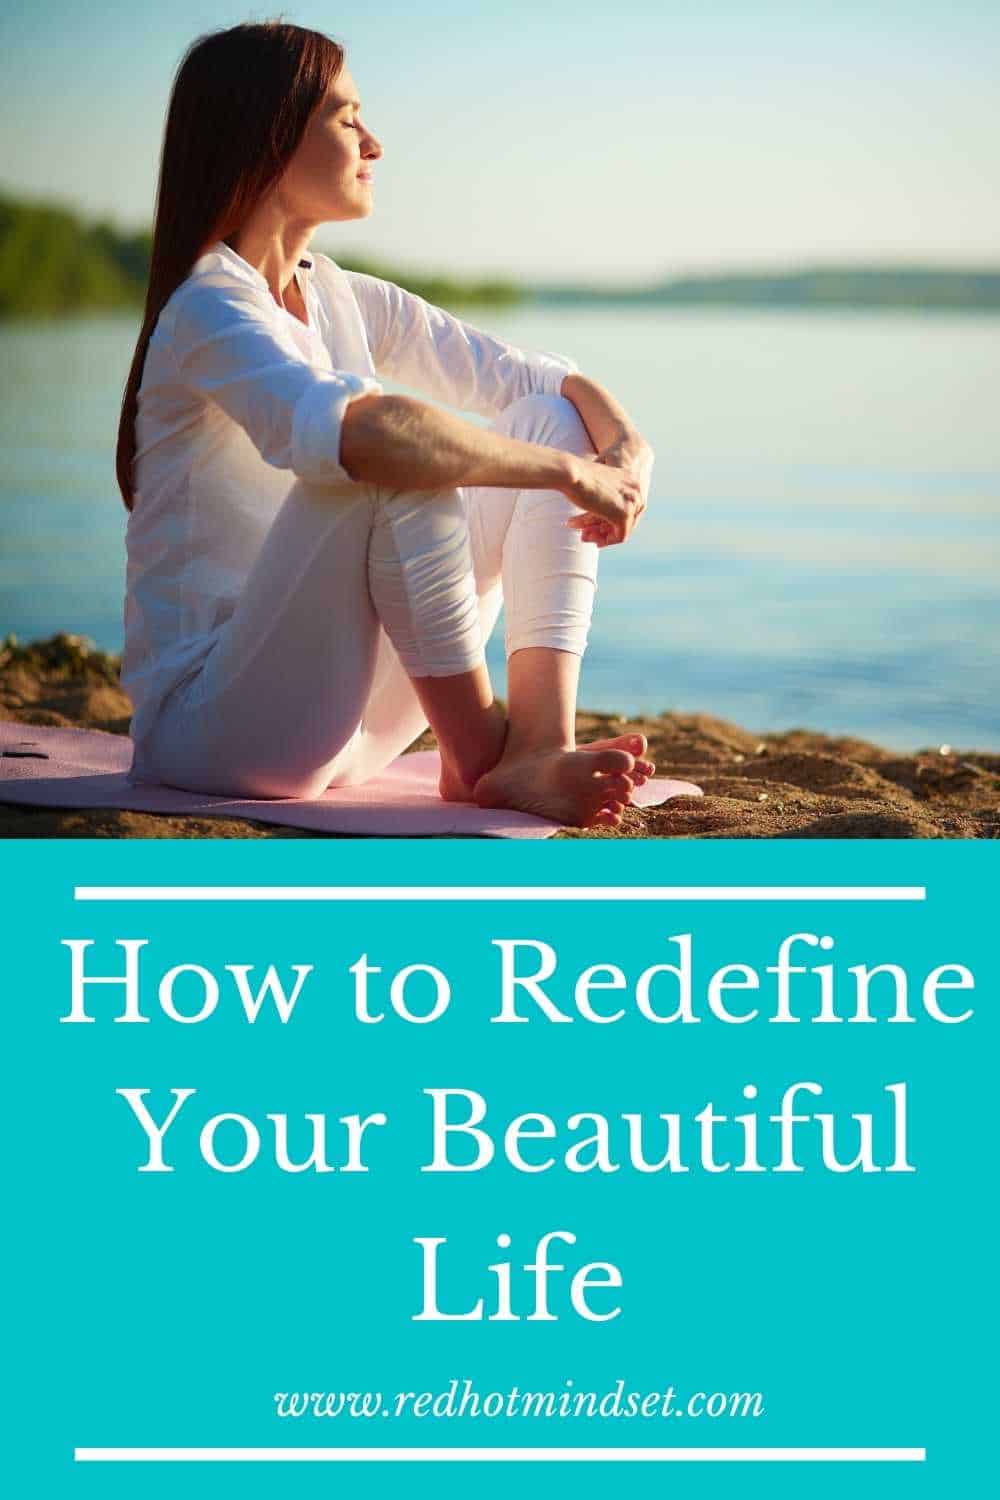 How to Redefine Your Beautiful Life